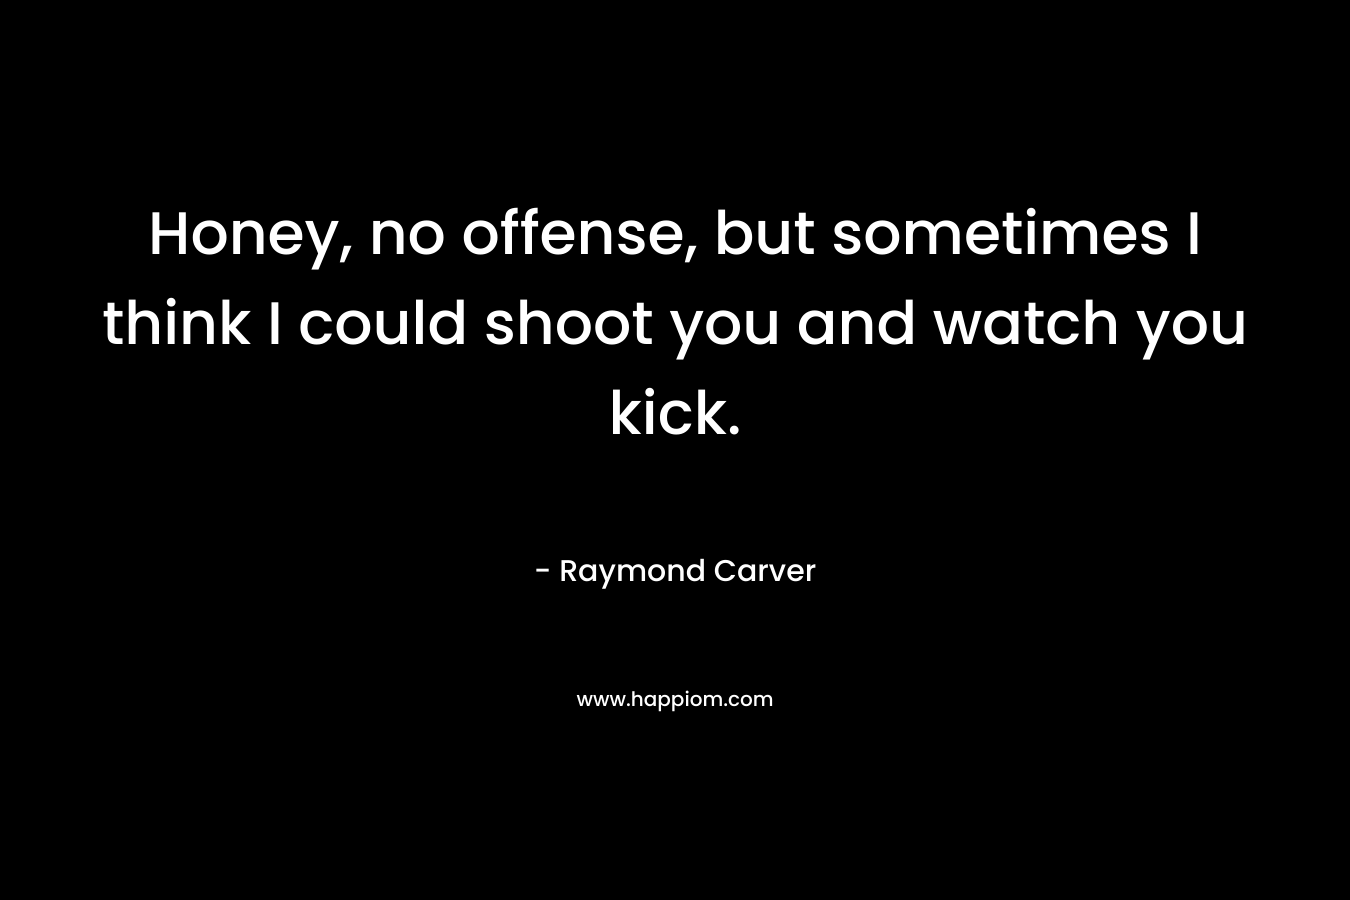 Honey, no offense, but sometimes I think I could shoot you and watch you kick. – Raymond Carver